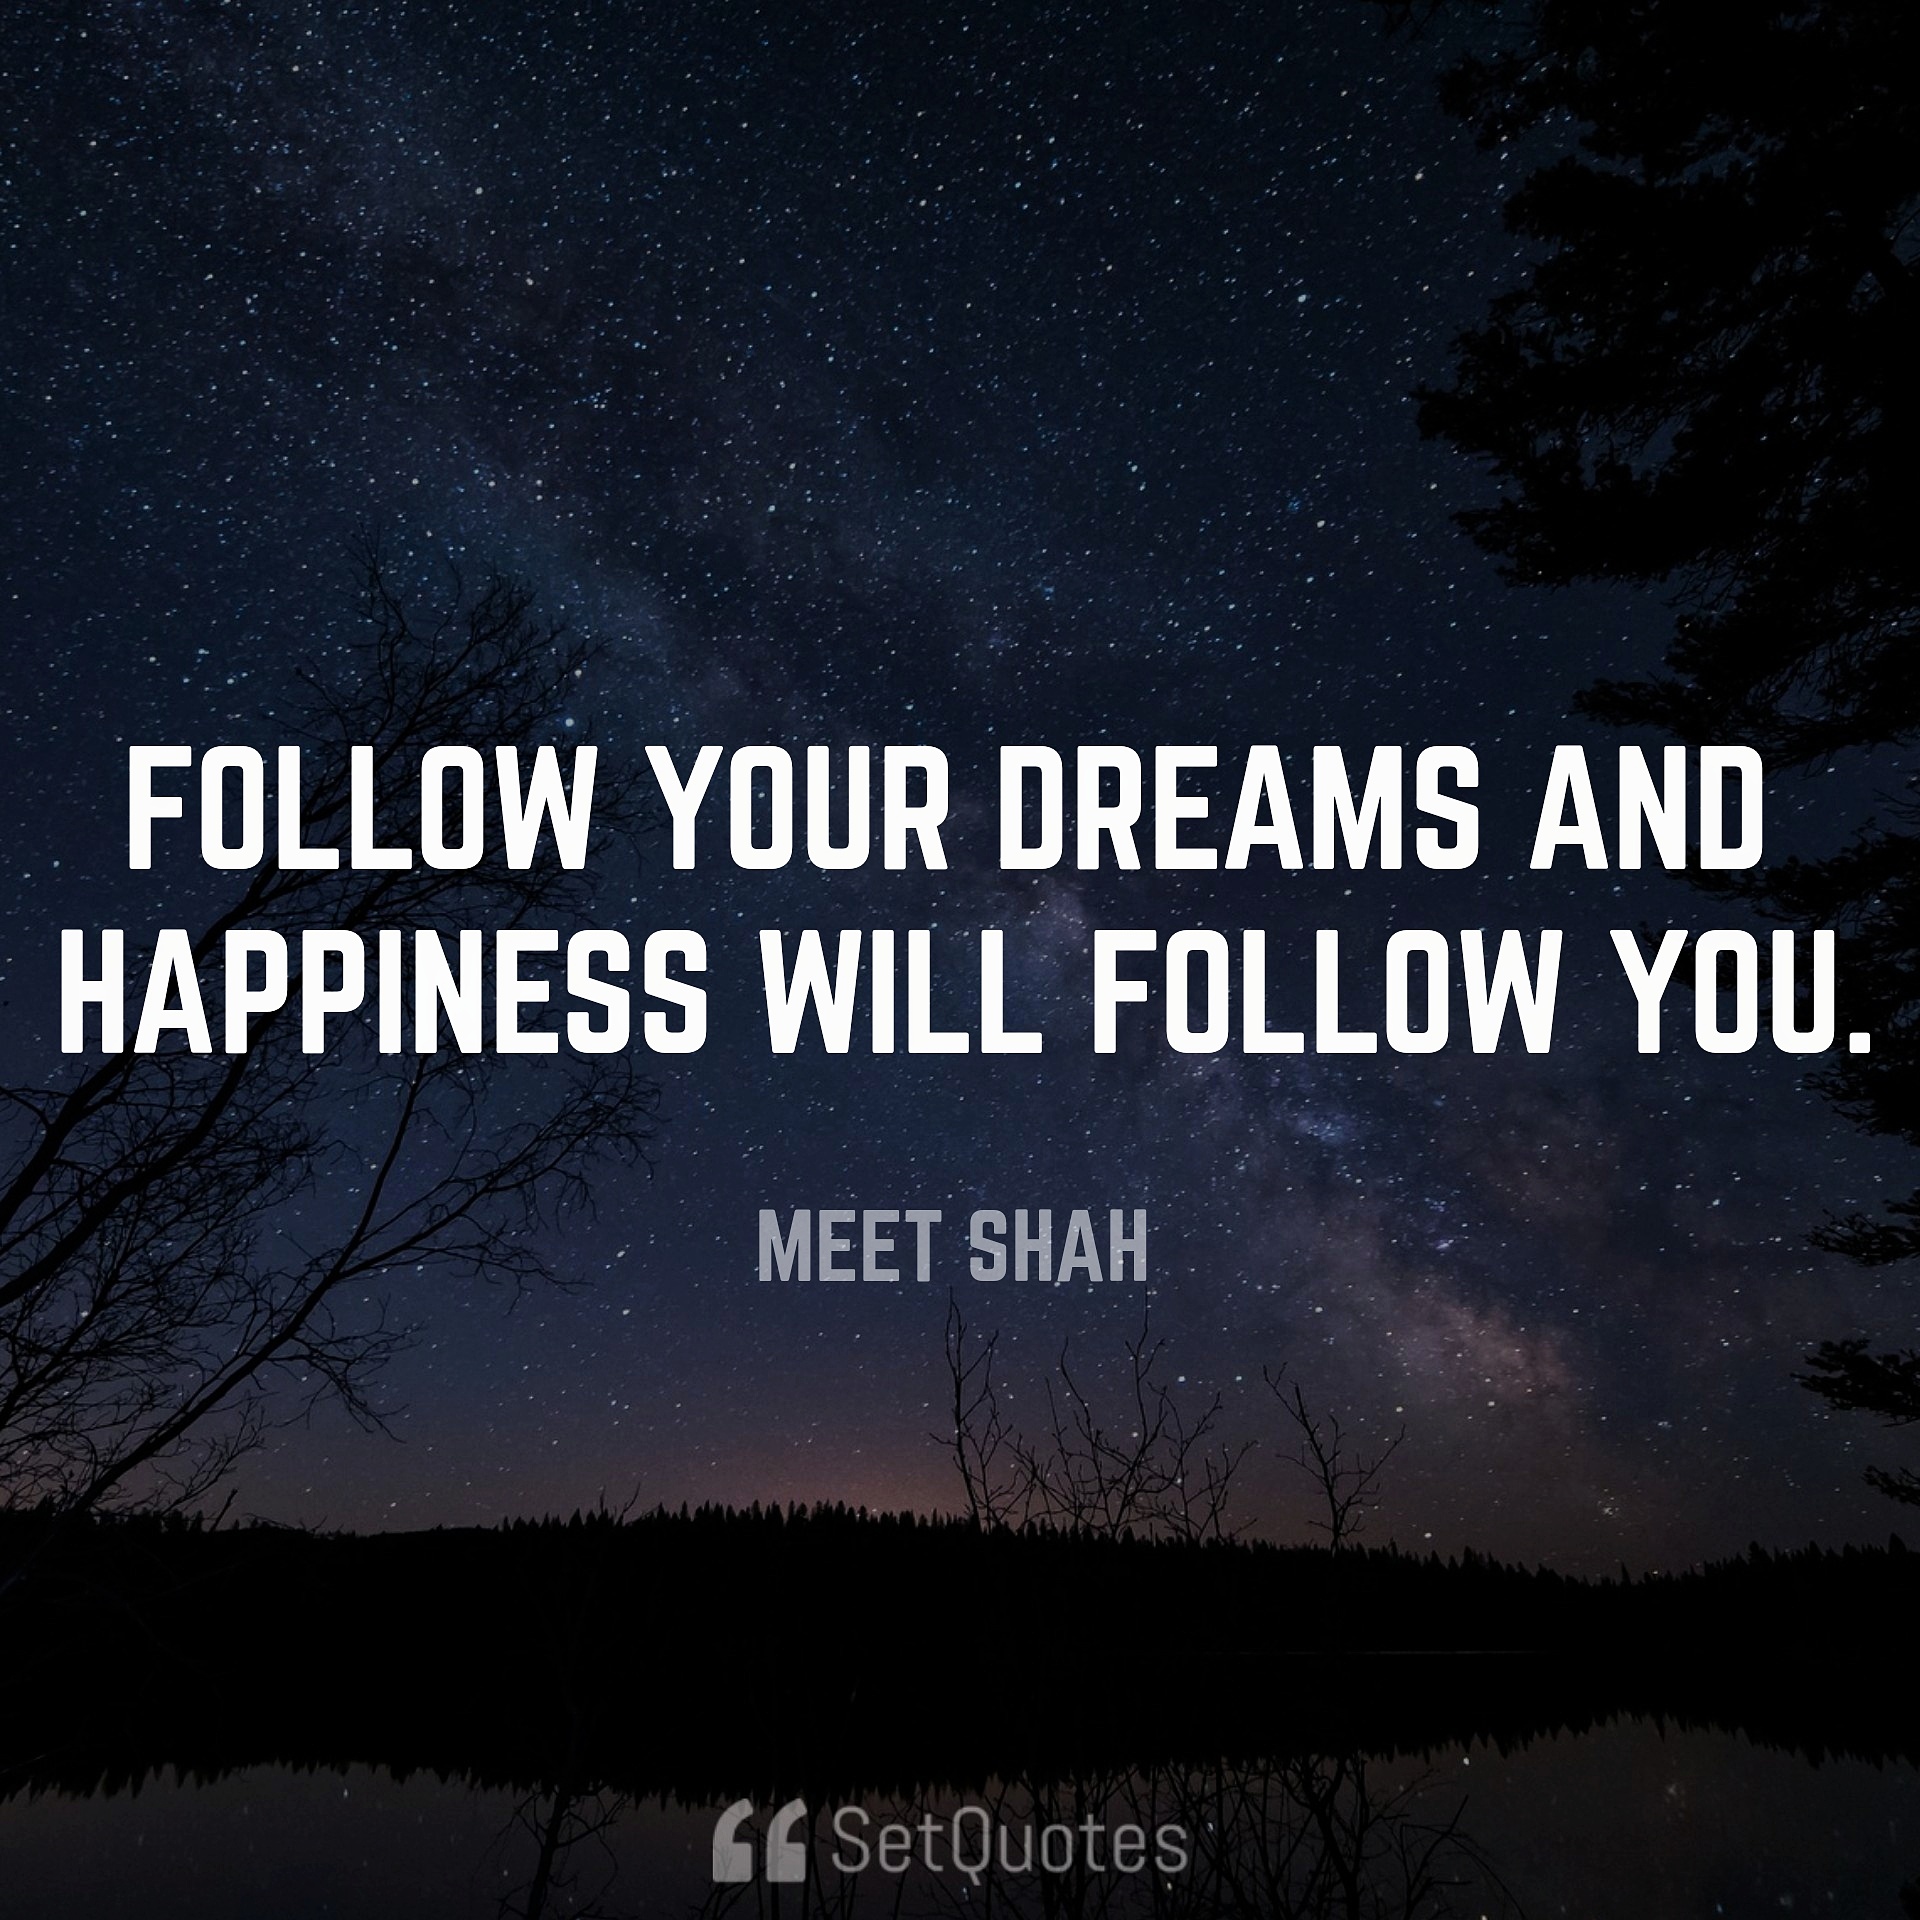 Follow your dreams, money and happiness will follow you. - Money Doesn't Buy Happiness quotes